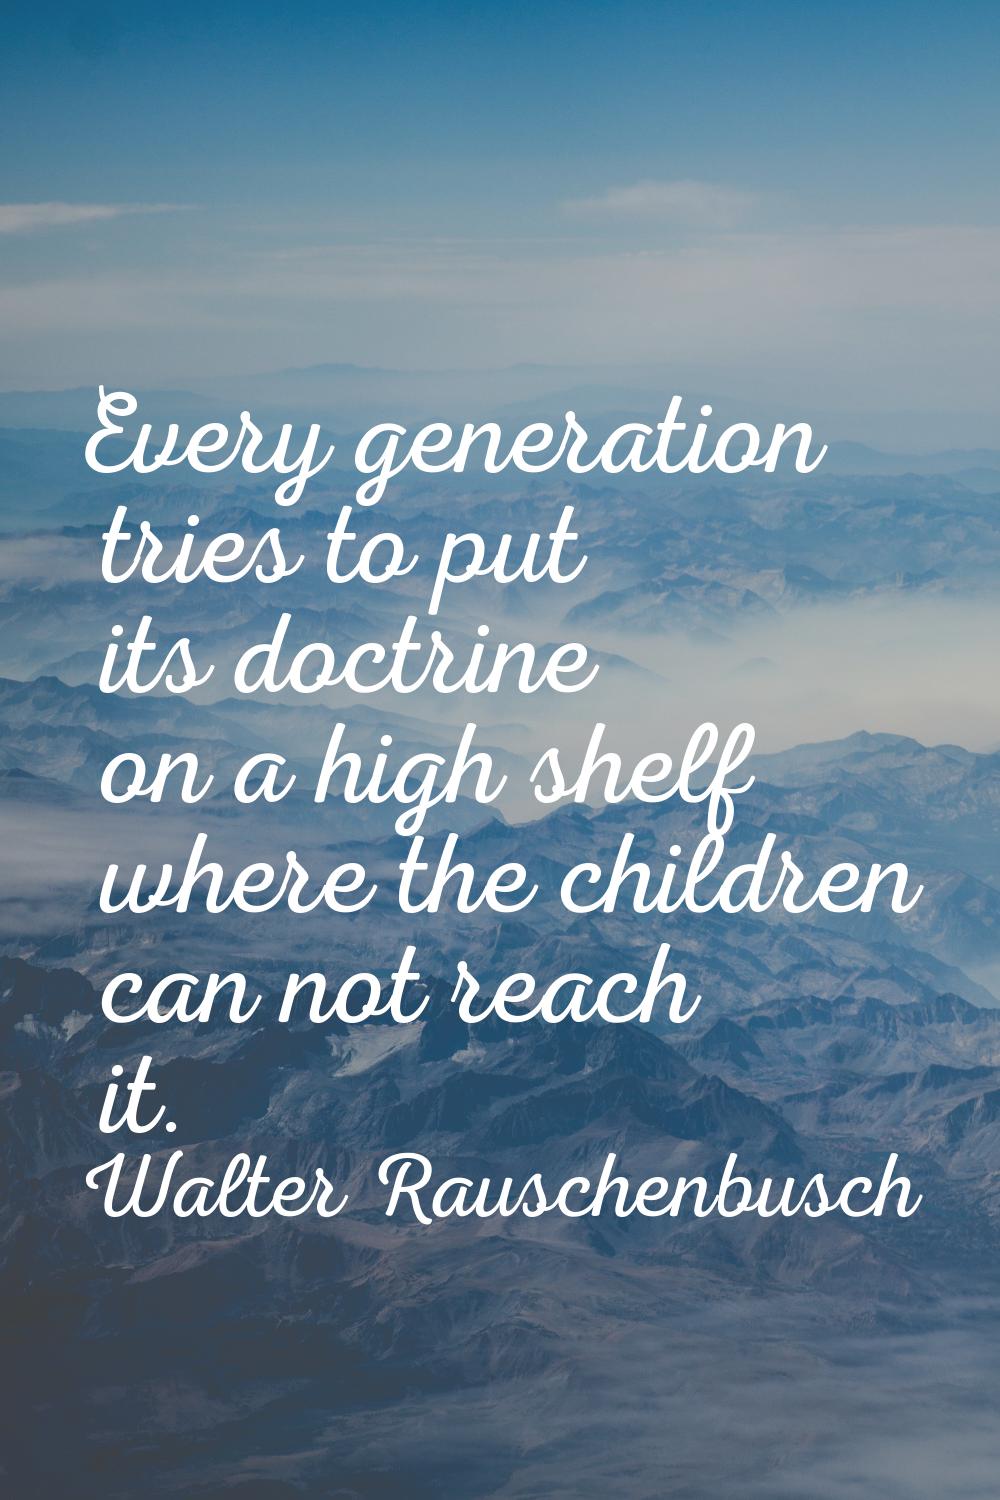 Every generation tries to put its doctrine on a high shelf where the children can not reach it.